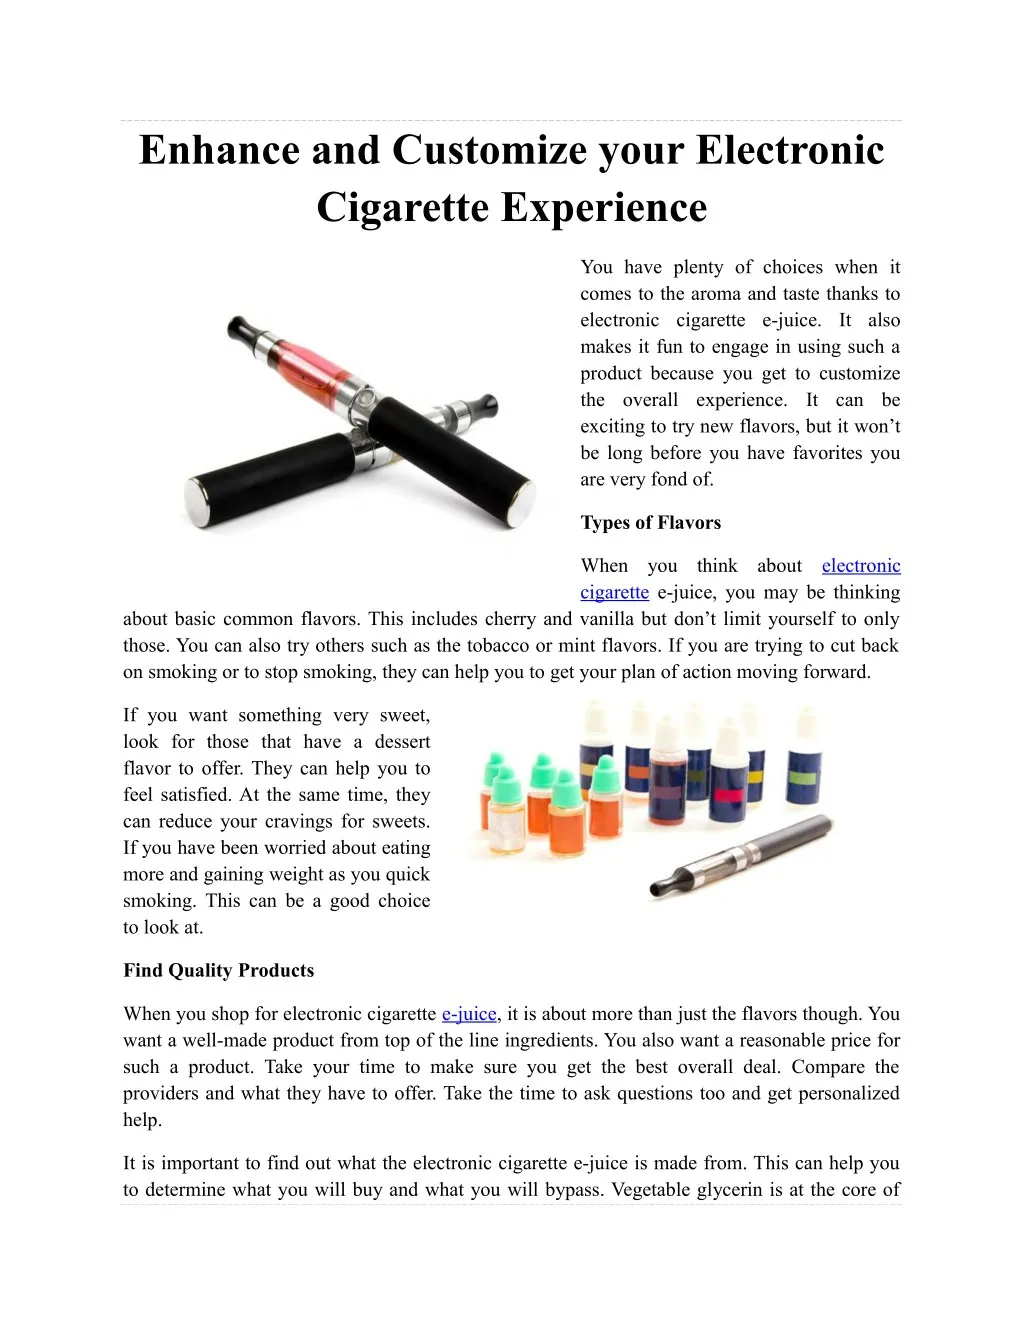 enhance and customize your electronic cigarette